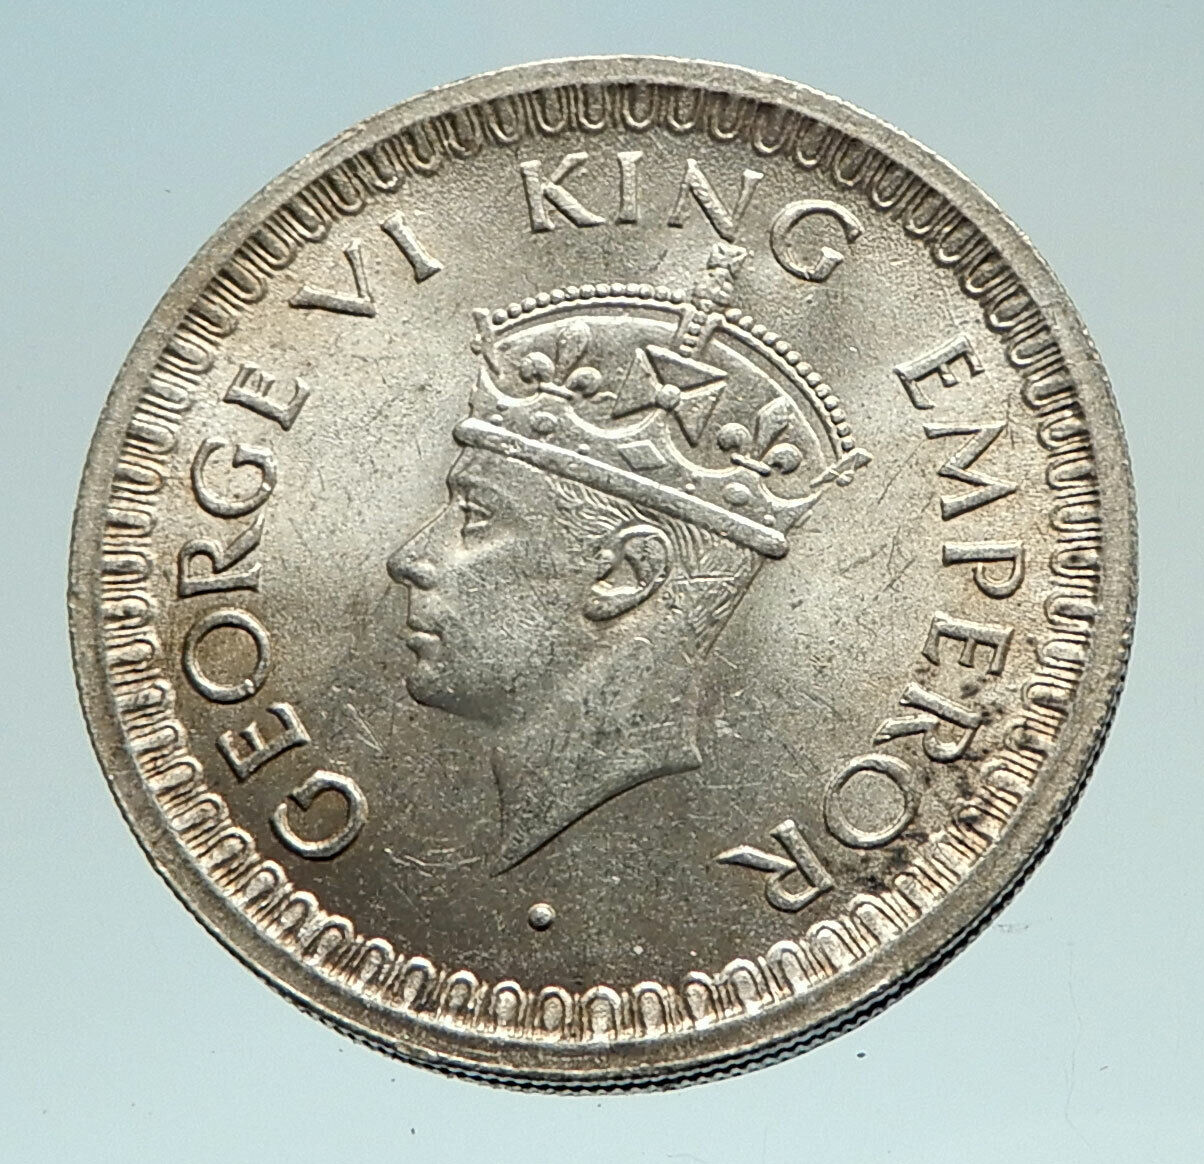 1944 INDIA States UK King George VI Genuine Silver 1/2 RUPEE Indian Coin i76968